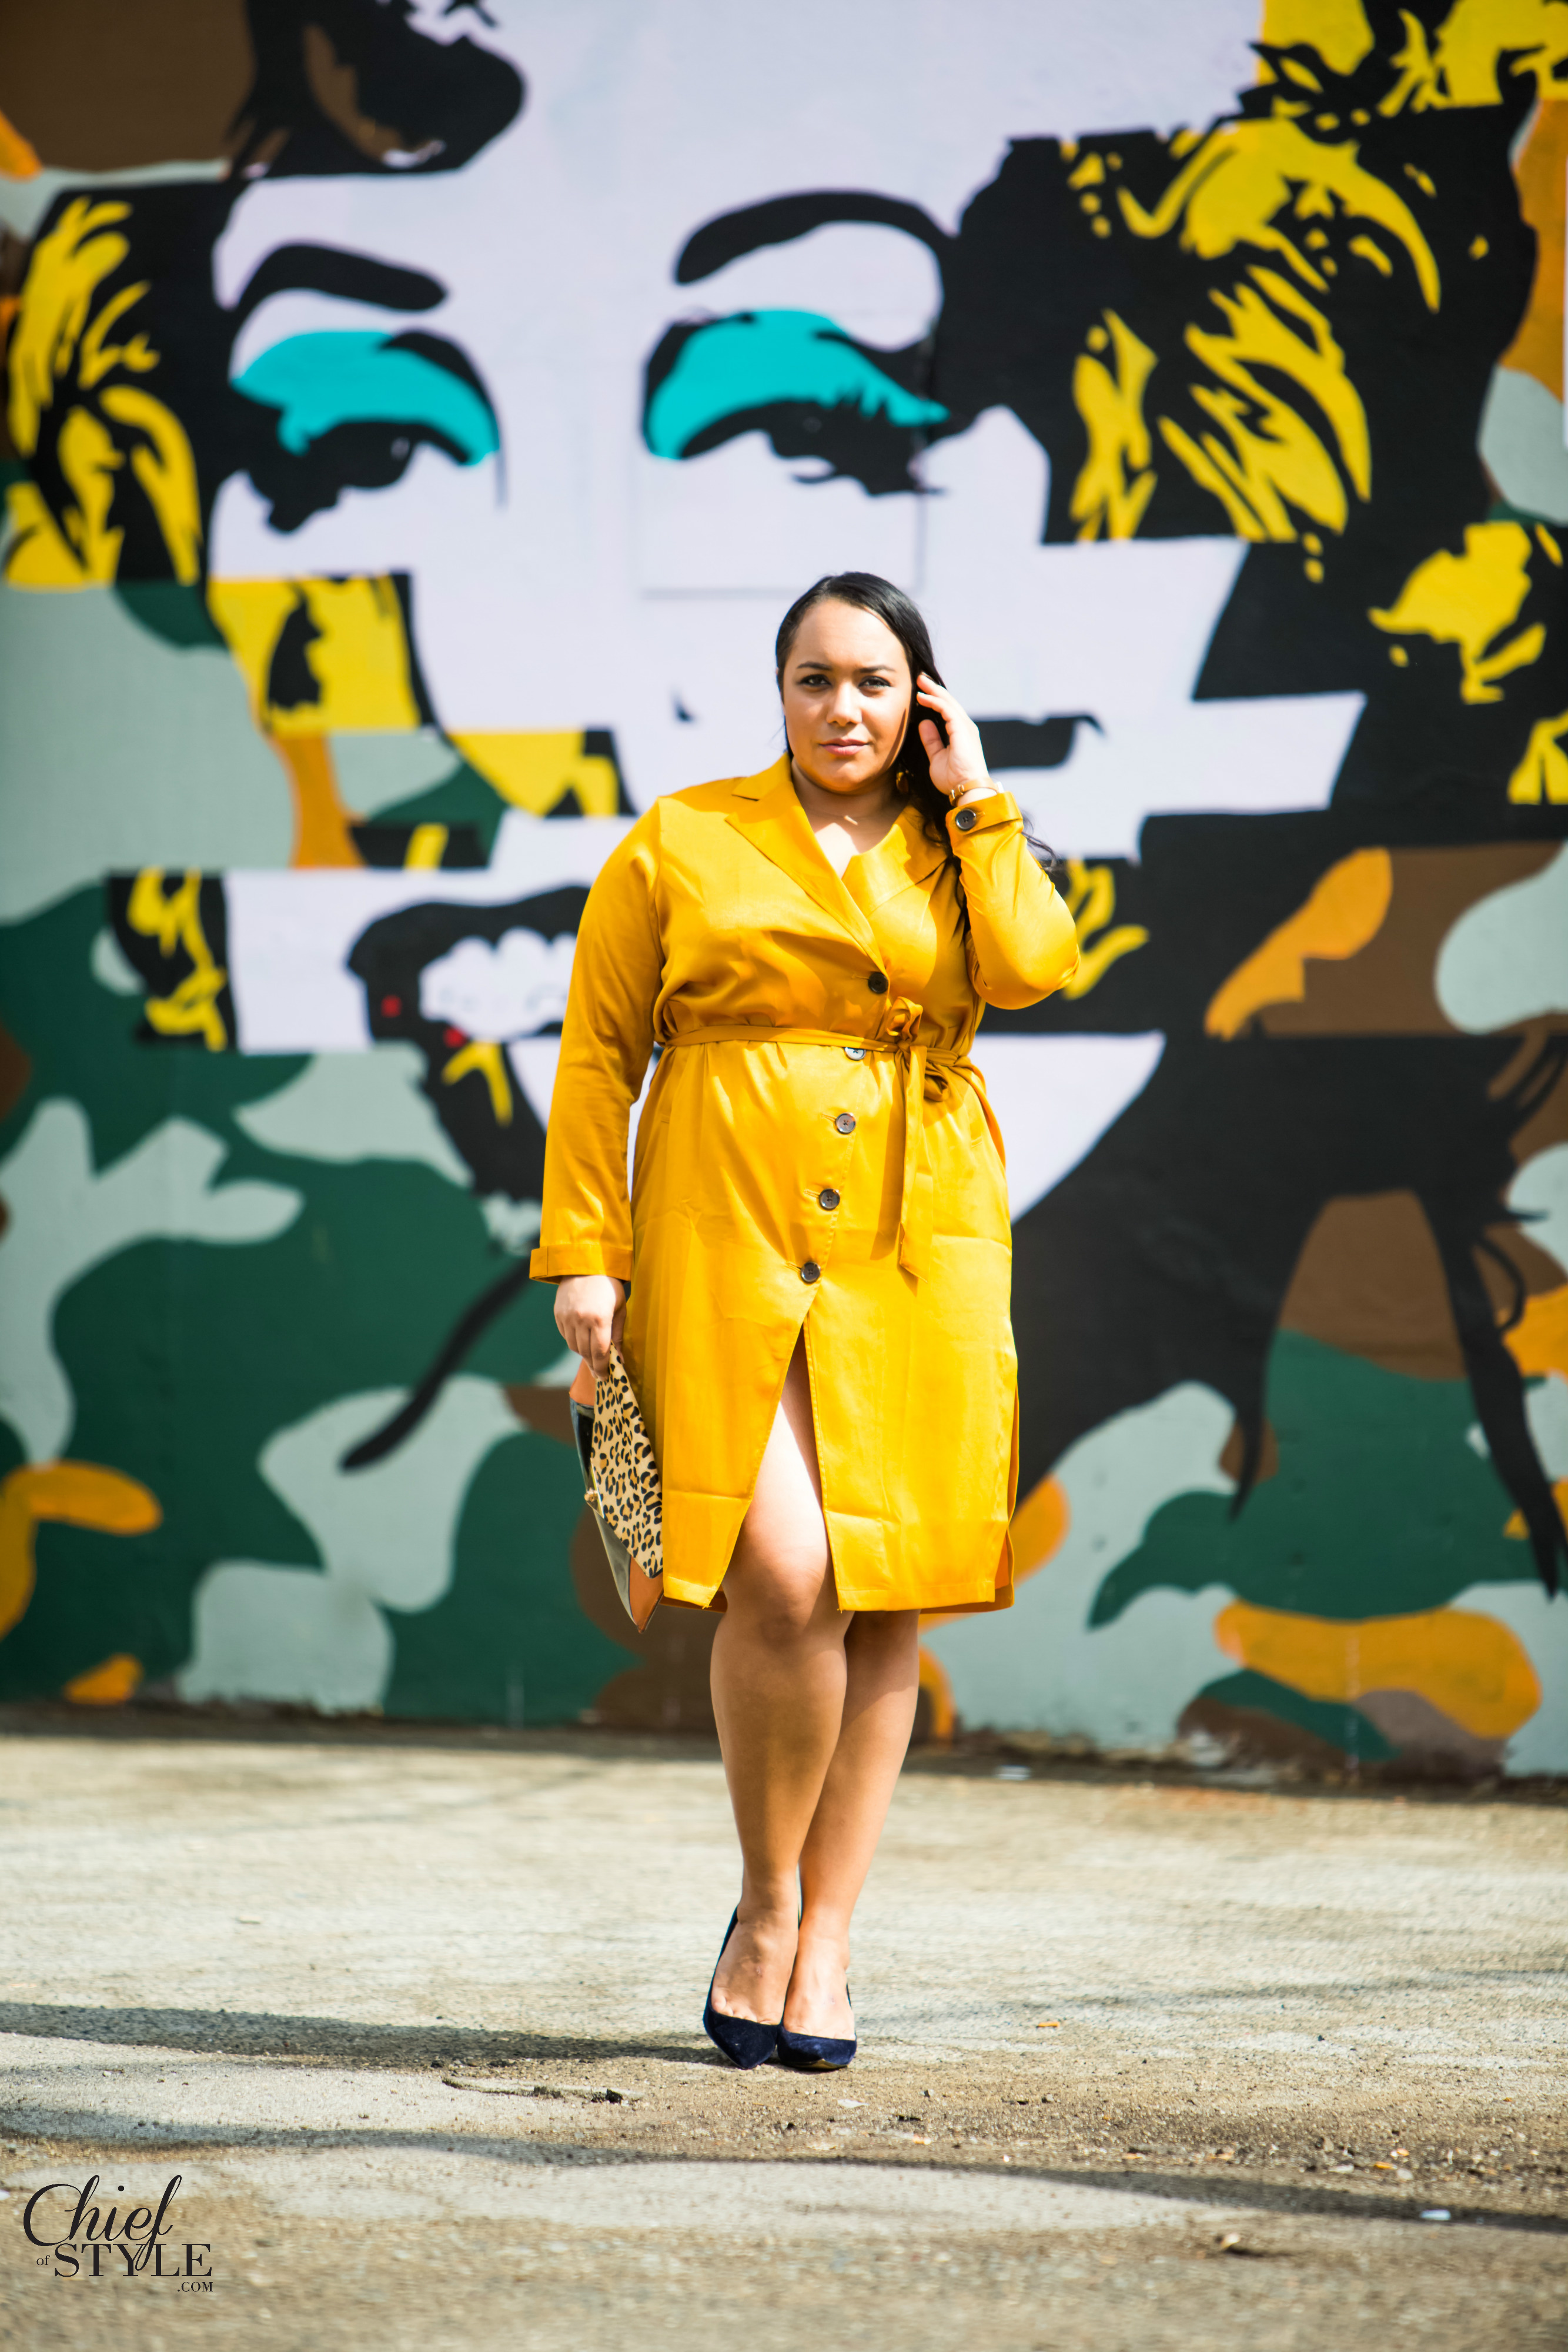 New plus size clothing brand Premme Sol Trench Coat Dress